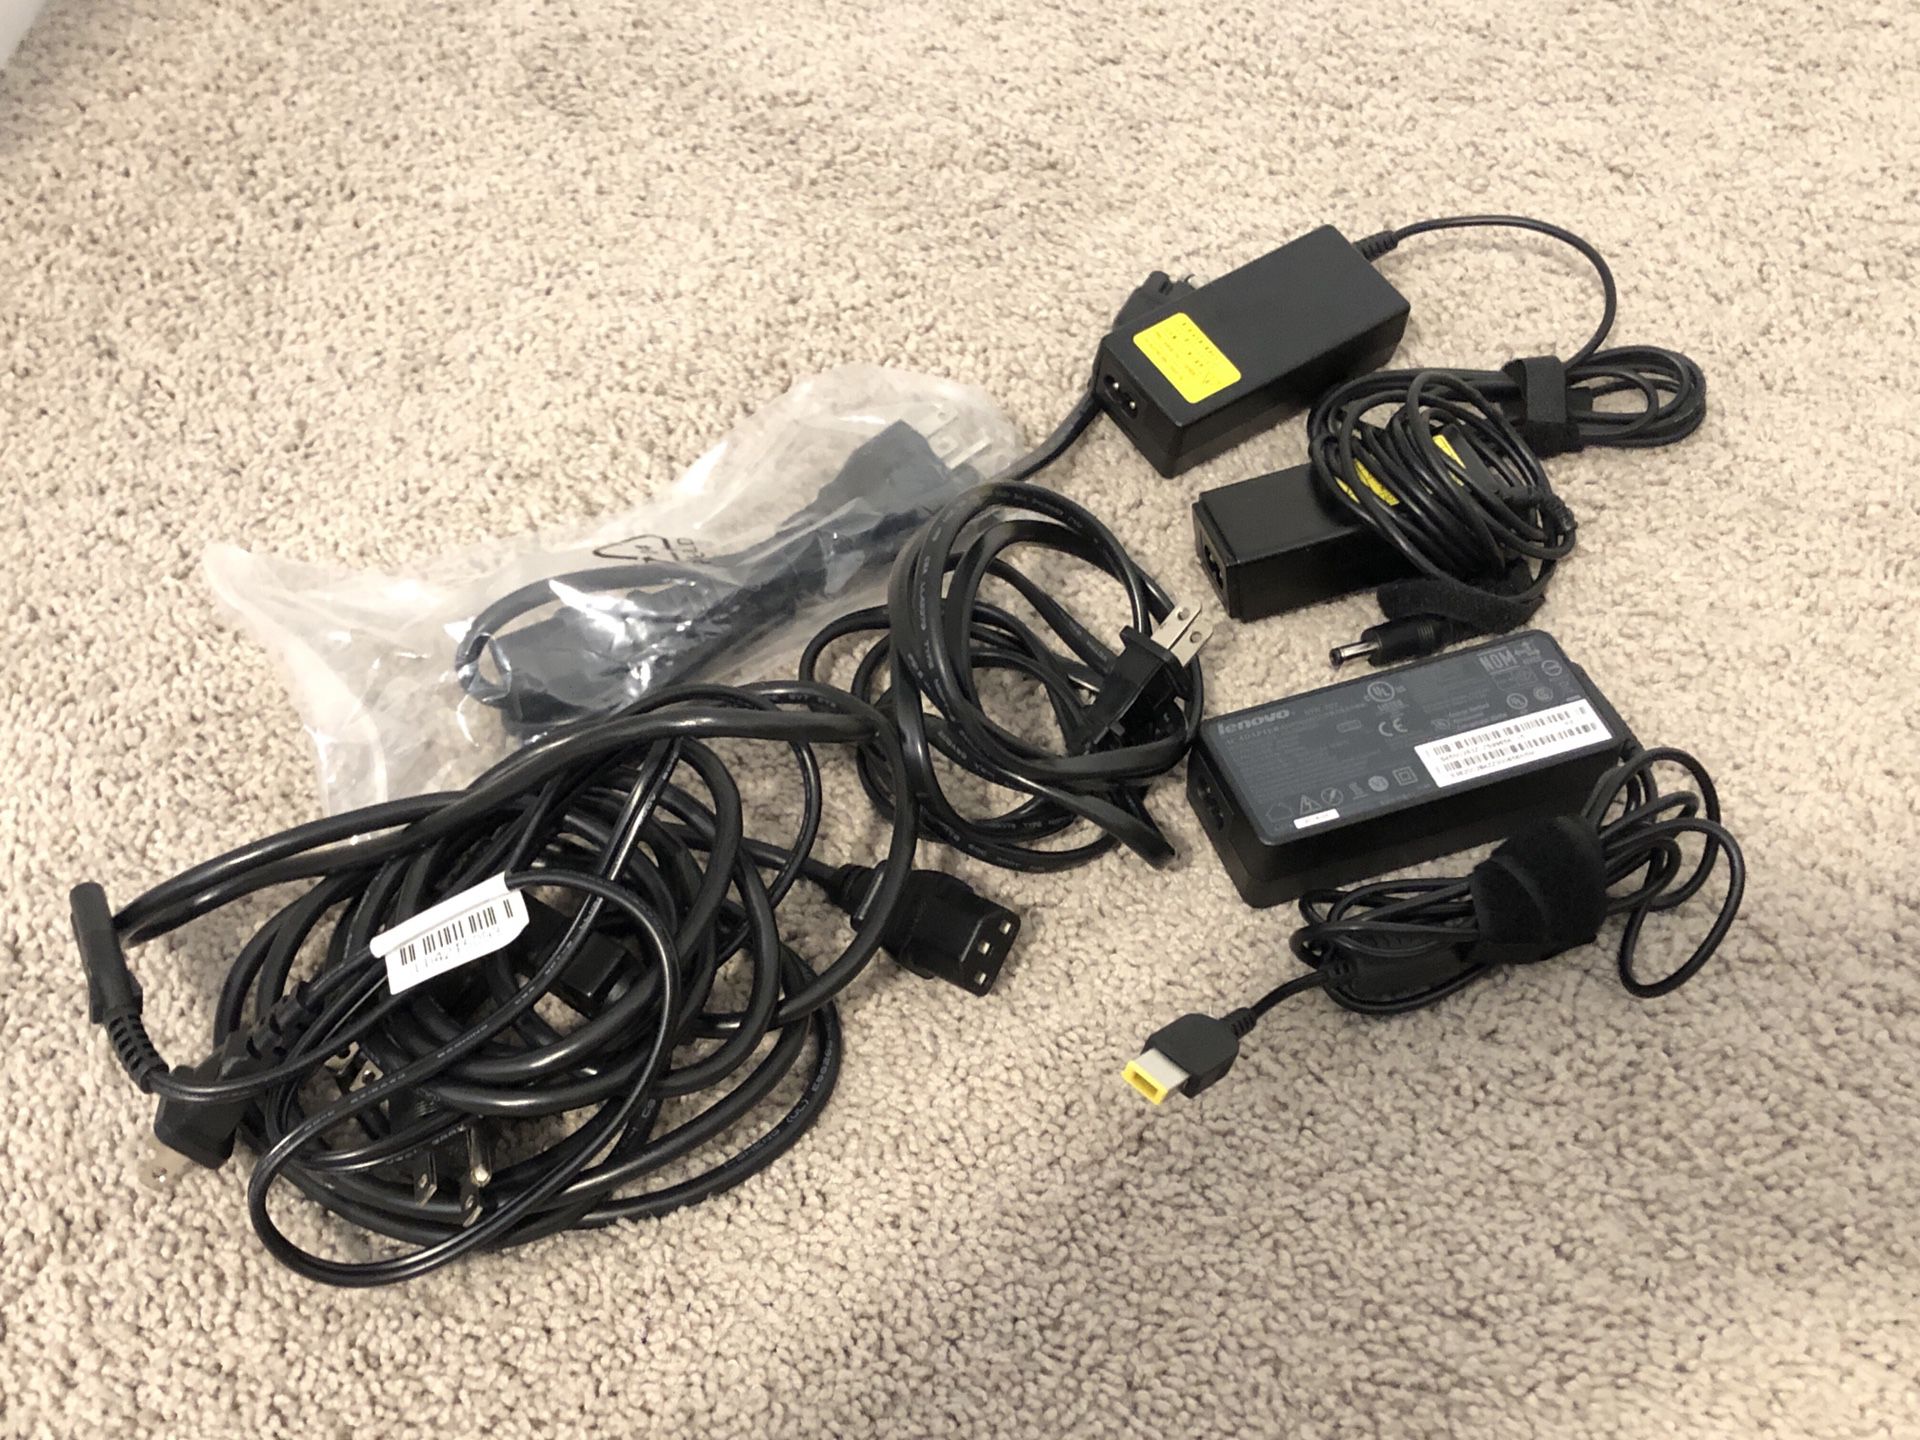 PC Power Cables and Adapters